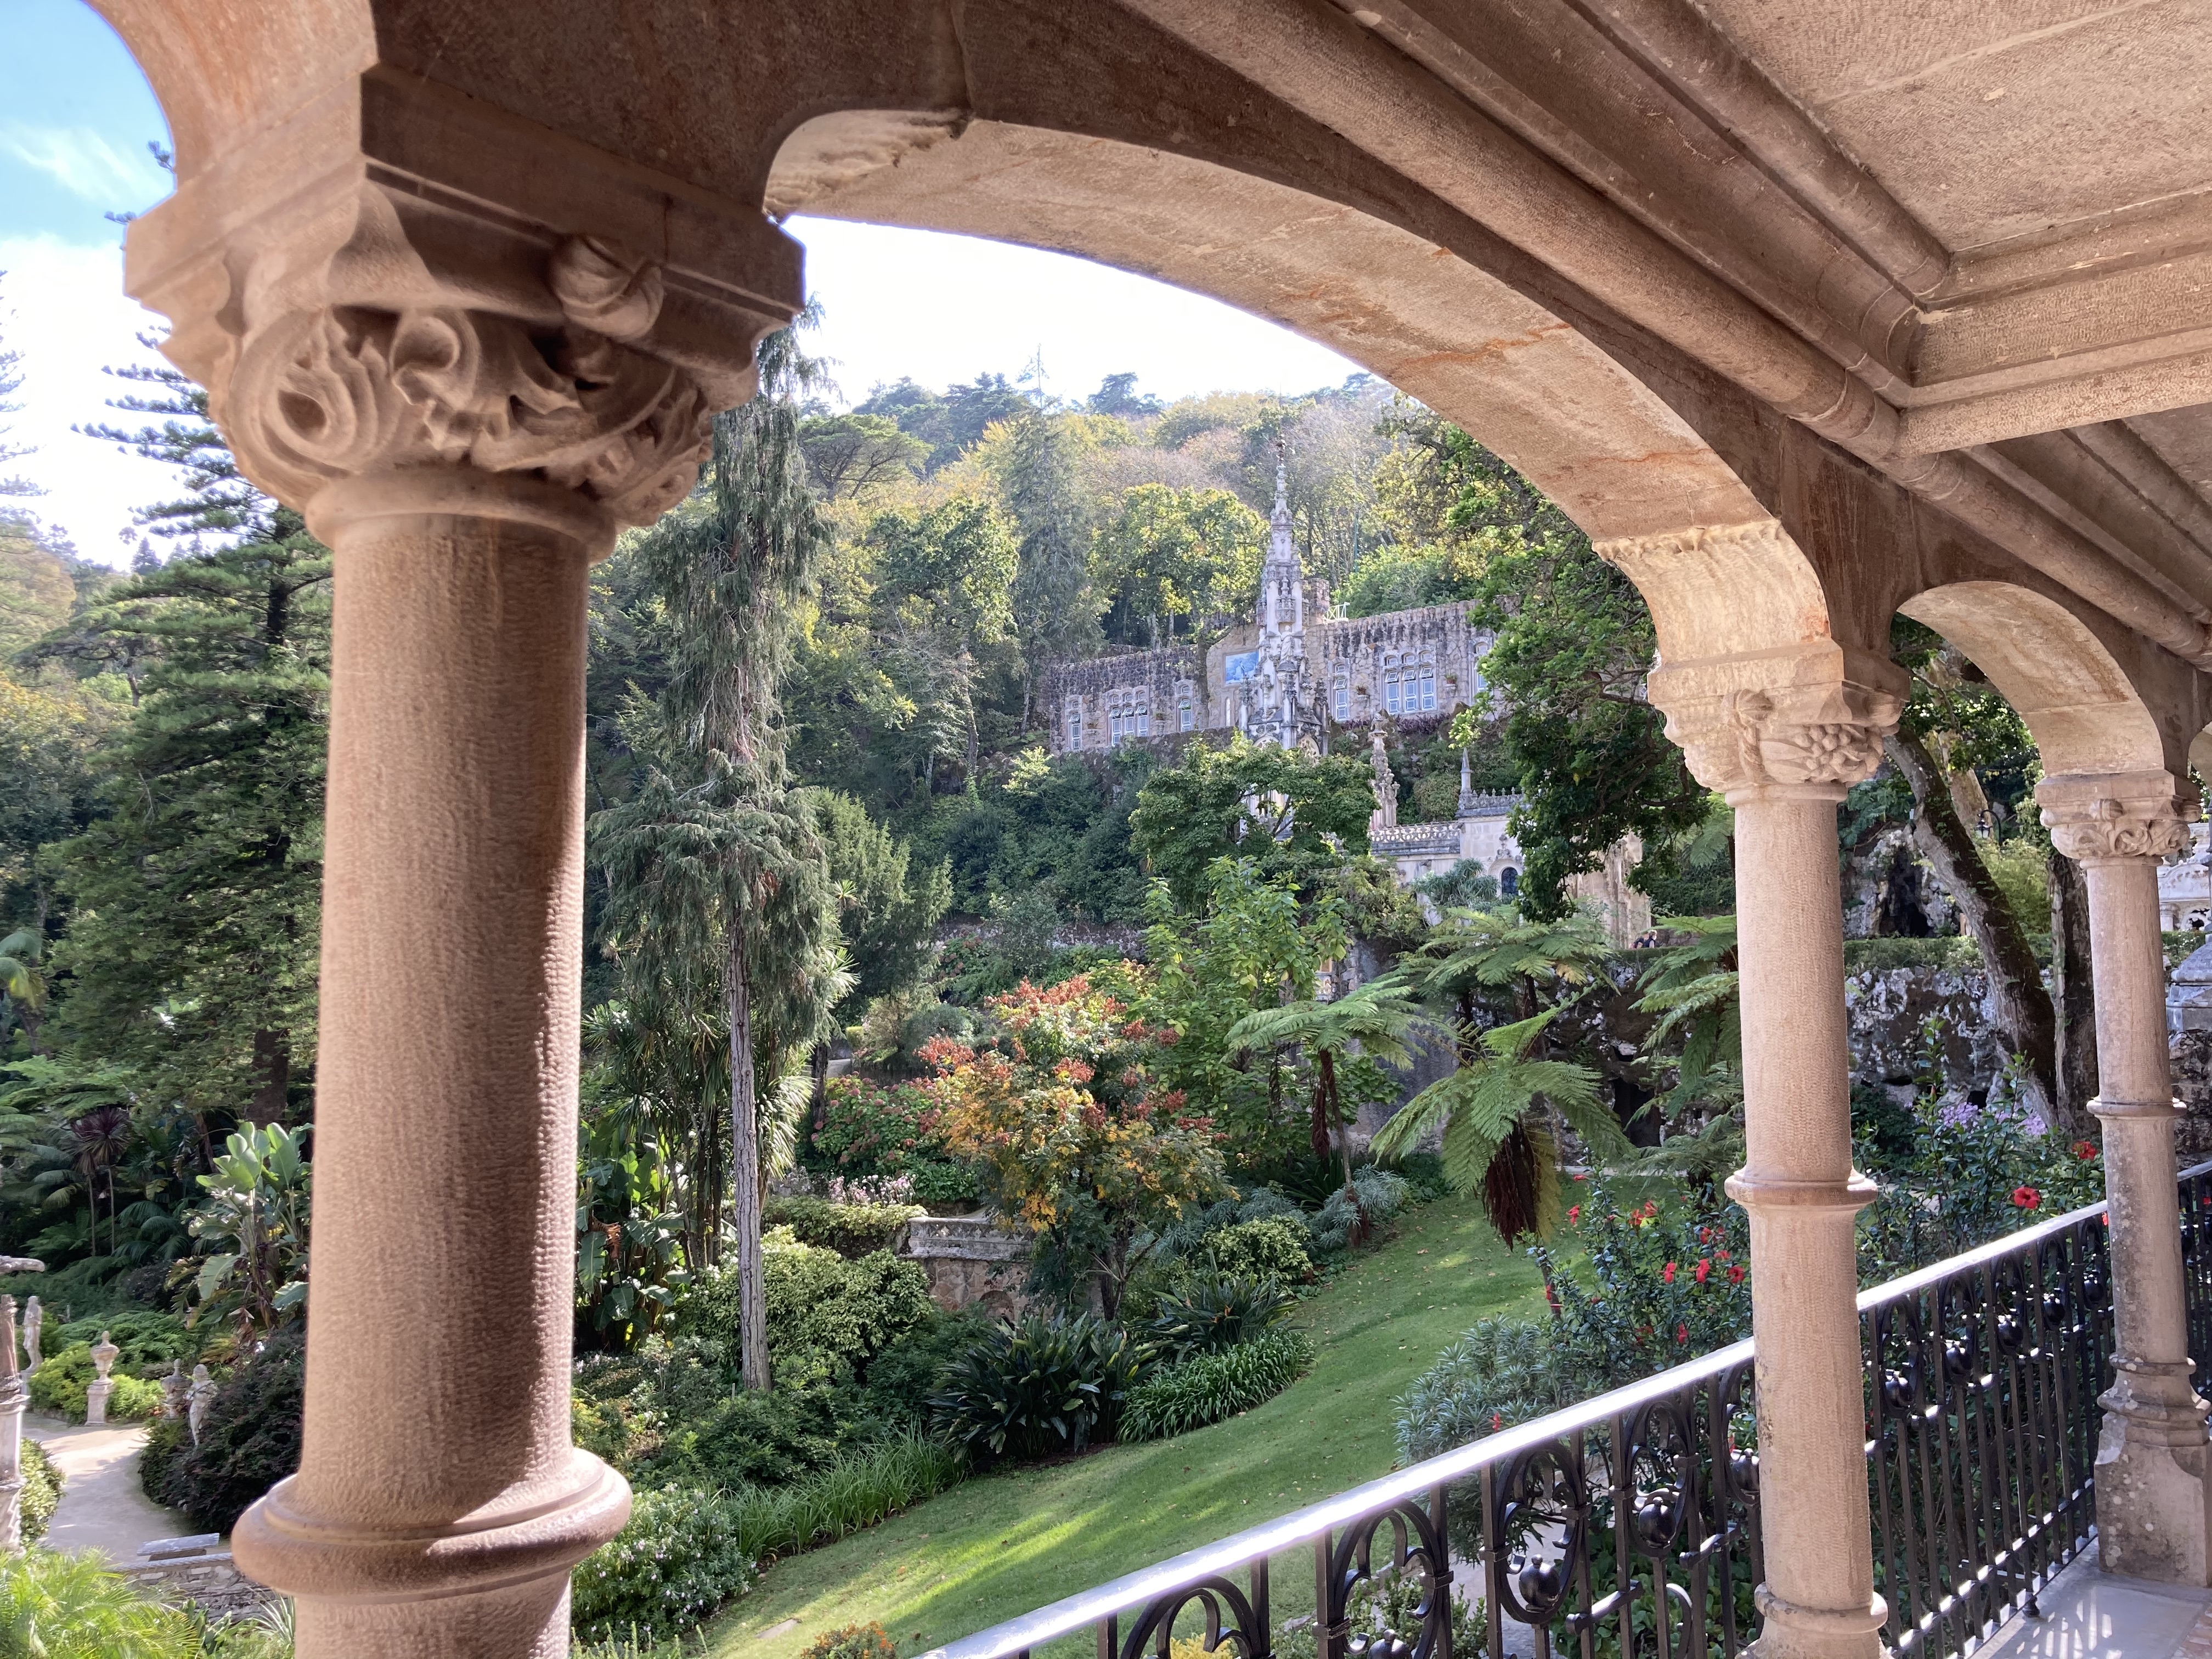 Looking out over the grounds at Quinta de Regaleira